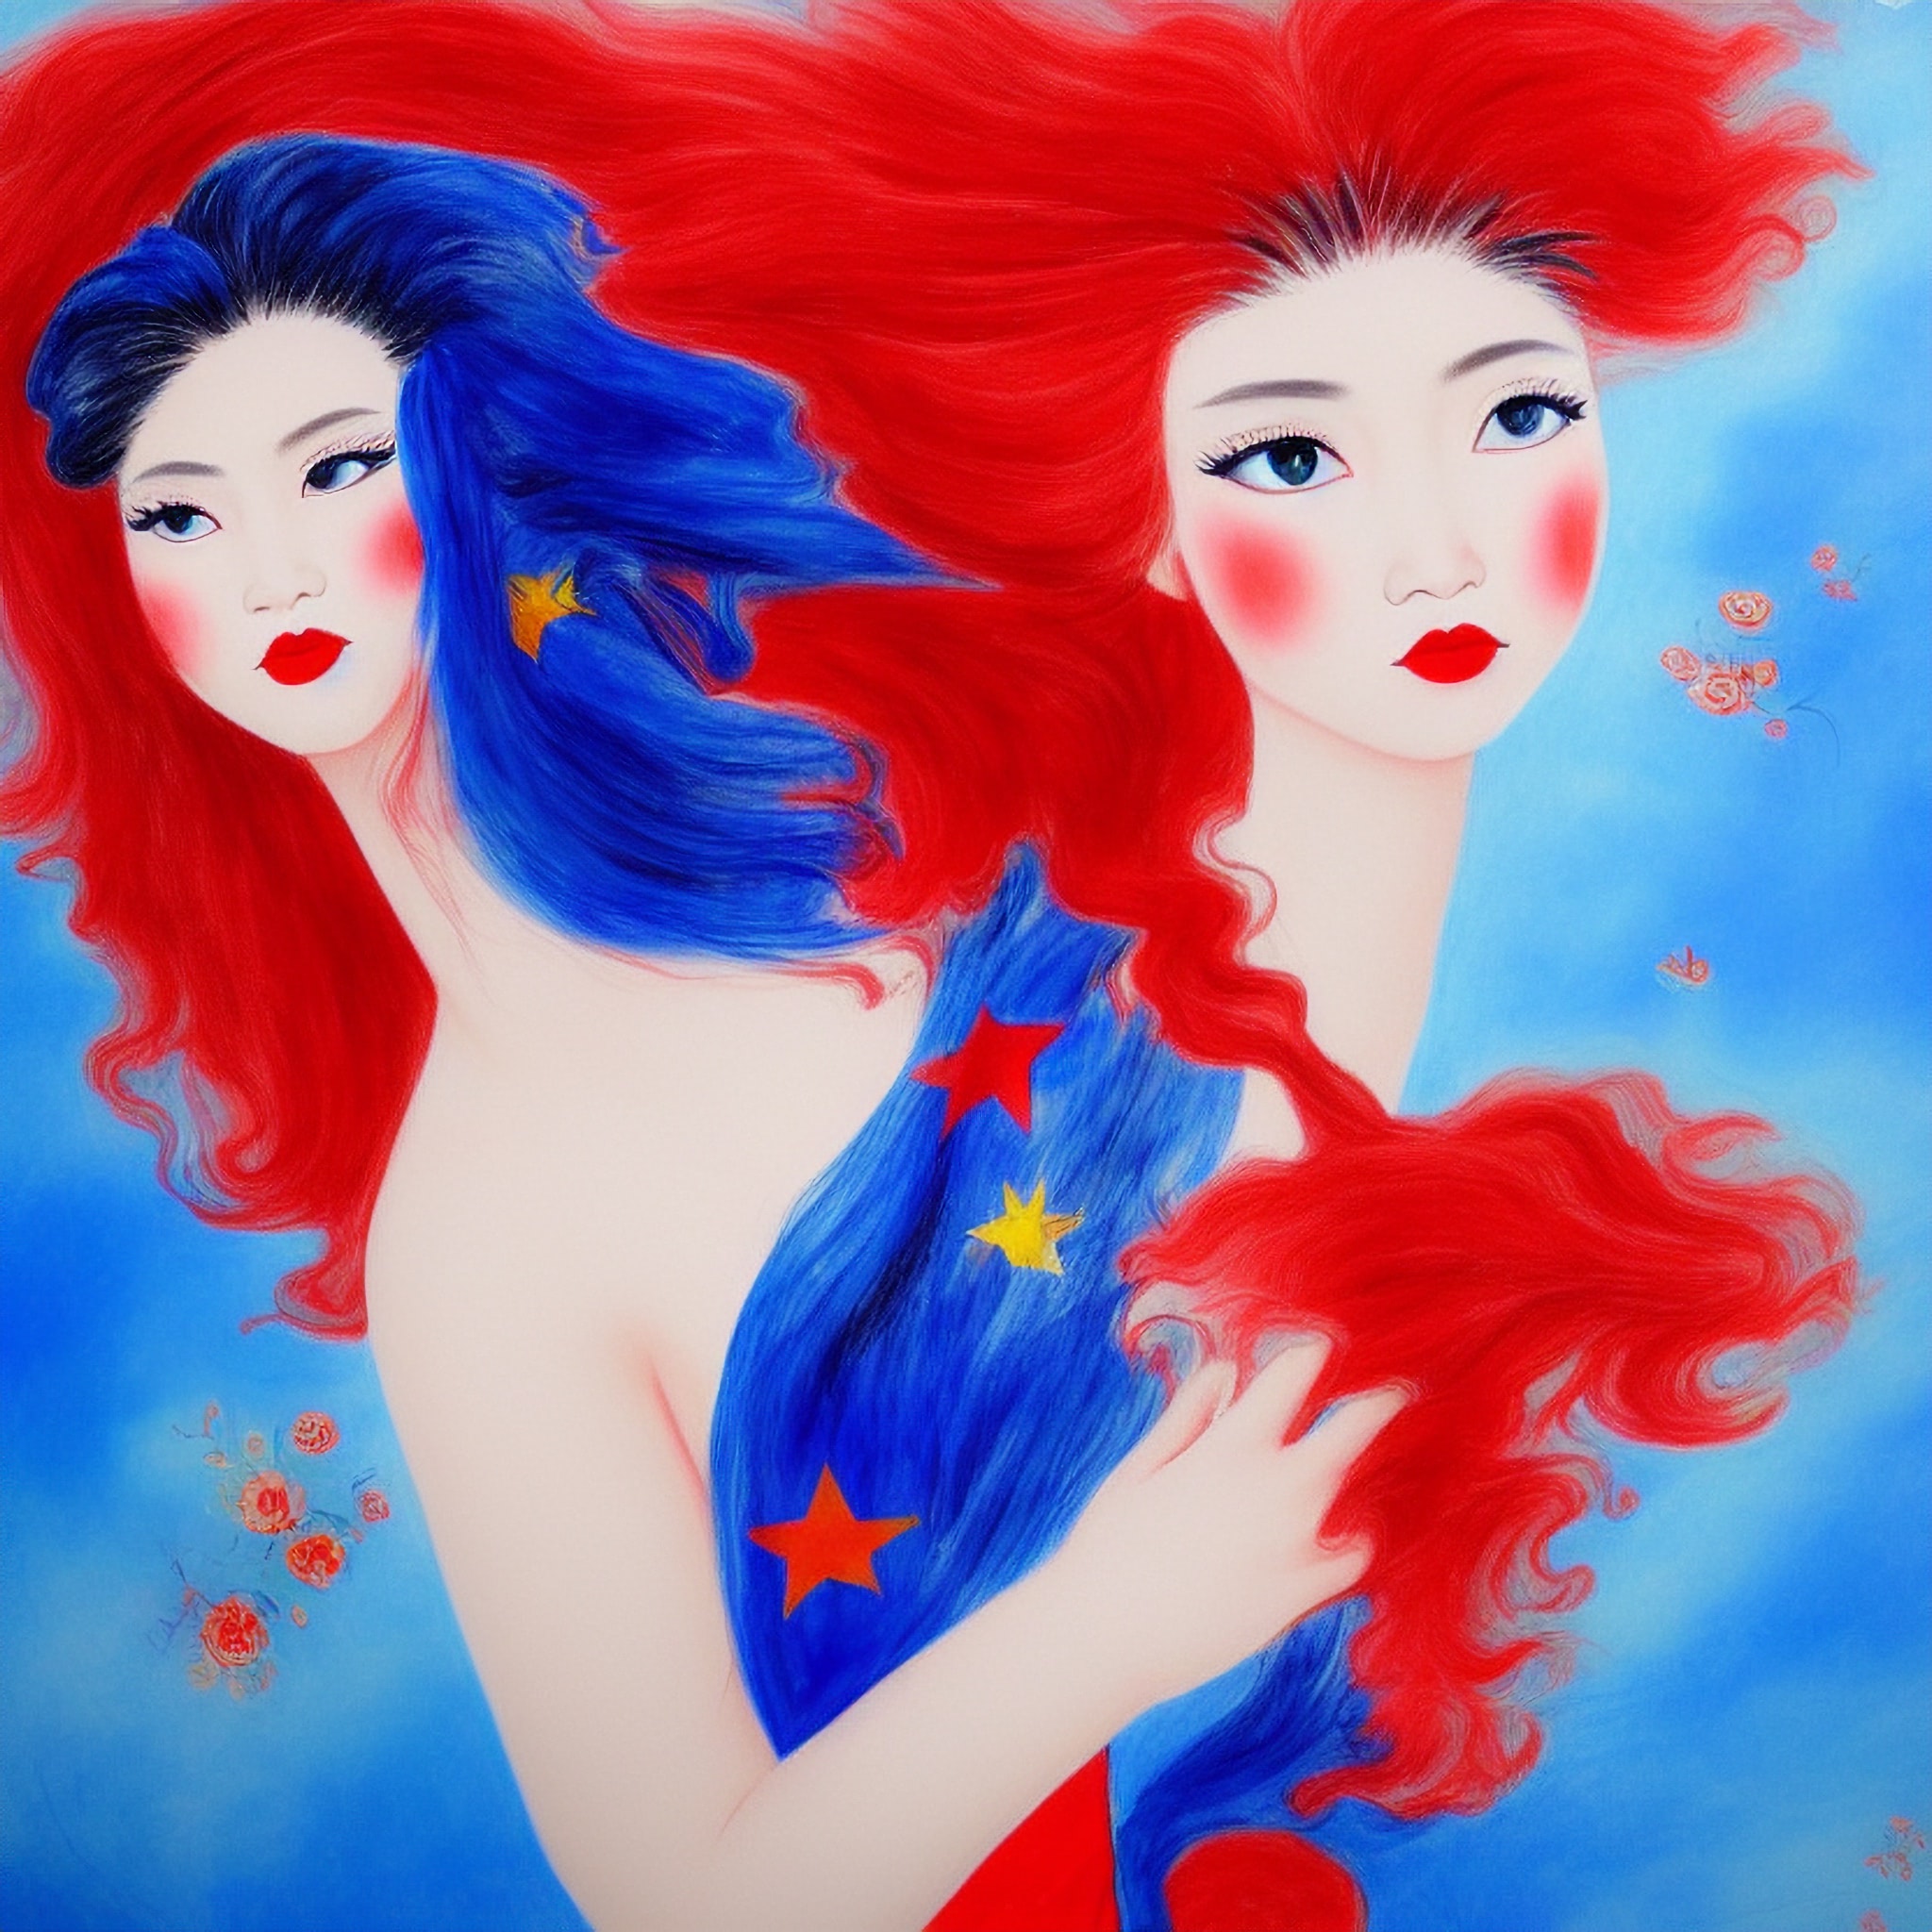 dreamy-painting-girl-blue-hair-red-3